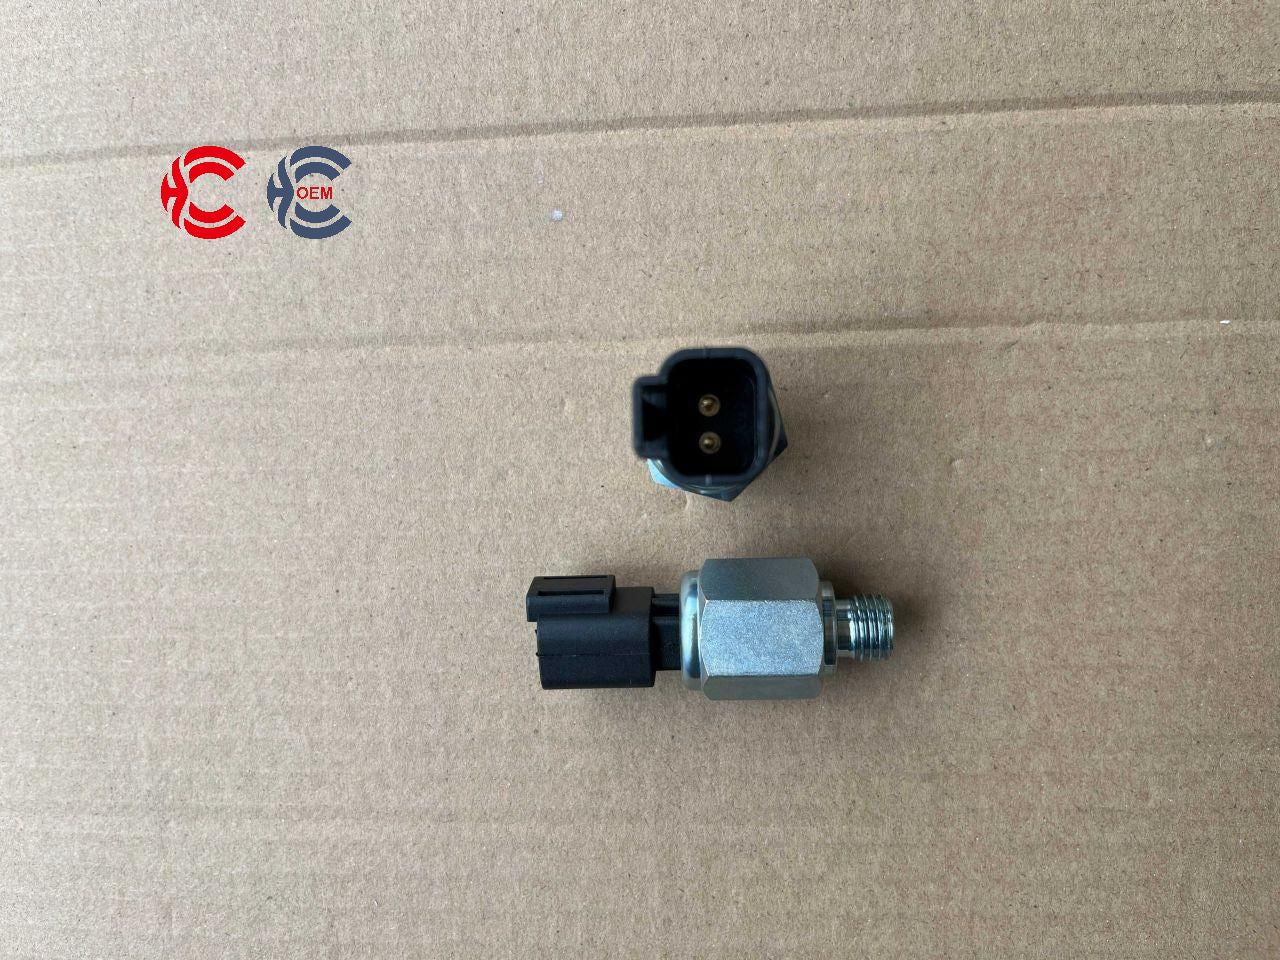 OEM: 2848A071Material: ABS MetalColor: GoldenOrigin: Made in ChinaWeight: 100gPacking List: 1* Pressure Sensor More ServiceWe can provide OEM Manufacturing serviceWe can Be your one-step solution for Auto PartsWe can provide technical scheme for you Feel Free to Contact Us, We will get back to you as soon as possible.